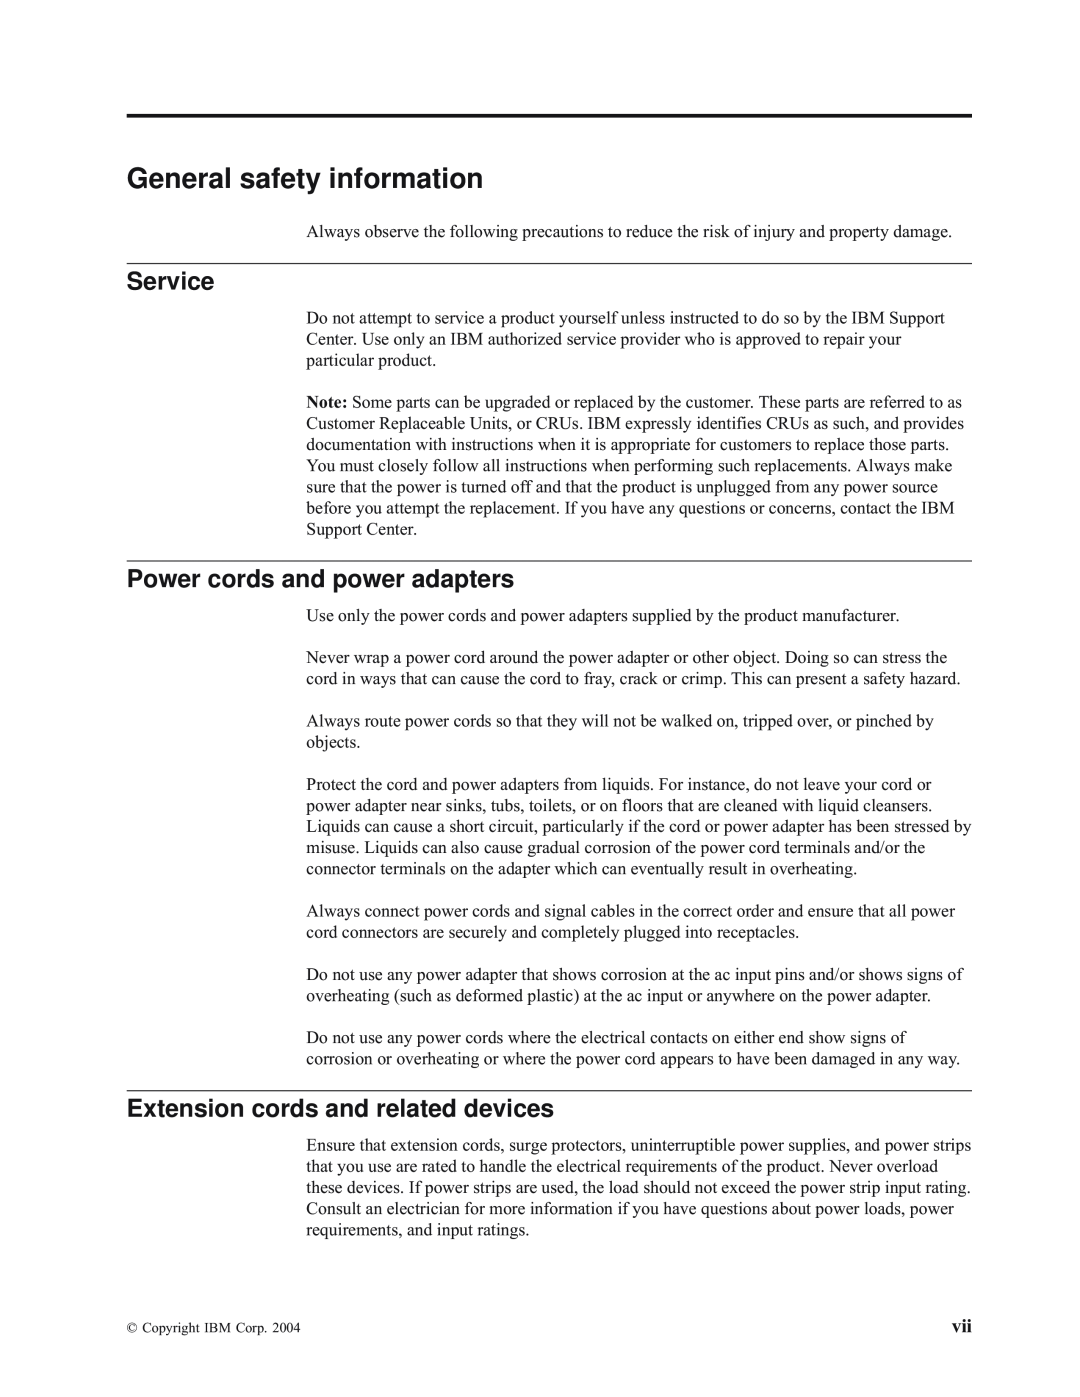 IBM E400 manual General safety information, Service, Power cords and power adapters, Extension cords and related devices 